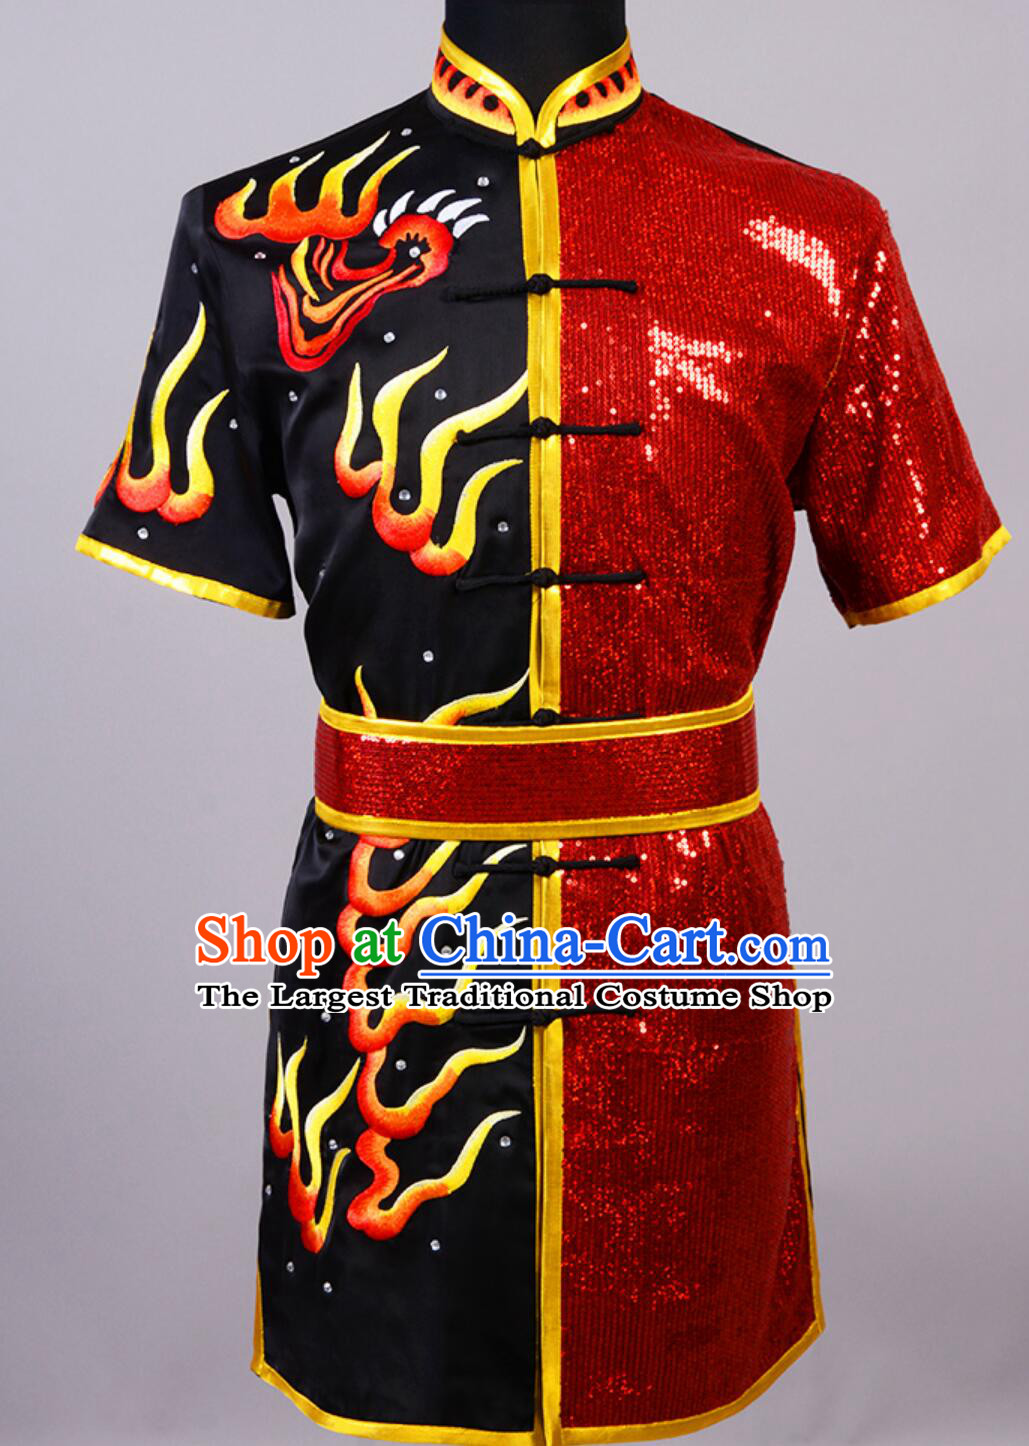 Chinese Martial Arts Changquan Costumes Traditional Kung Fu Training Uniform Professional Wushu Competition Embroidered Tiger Outfit